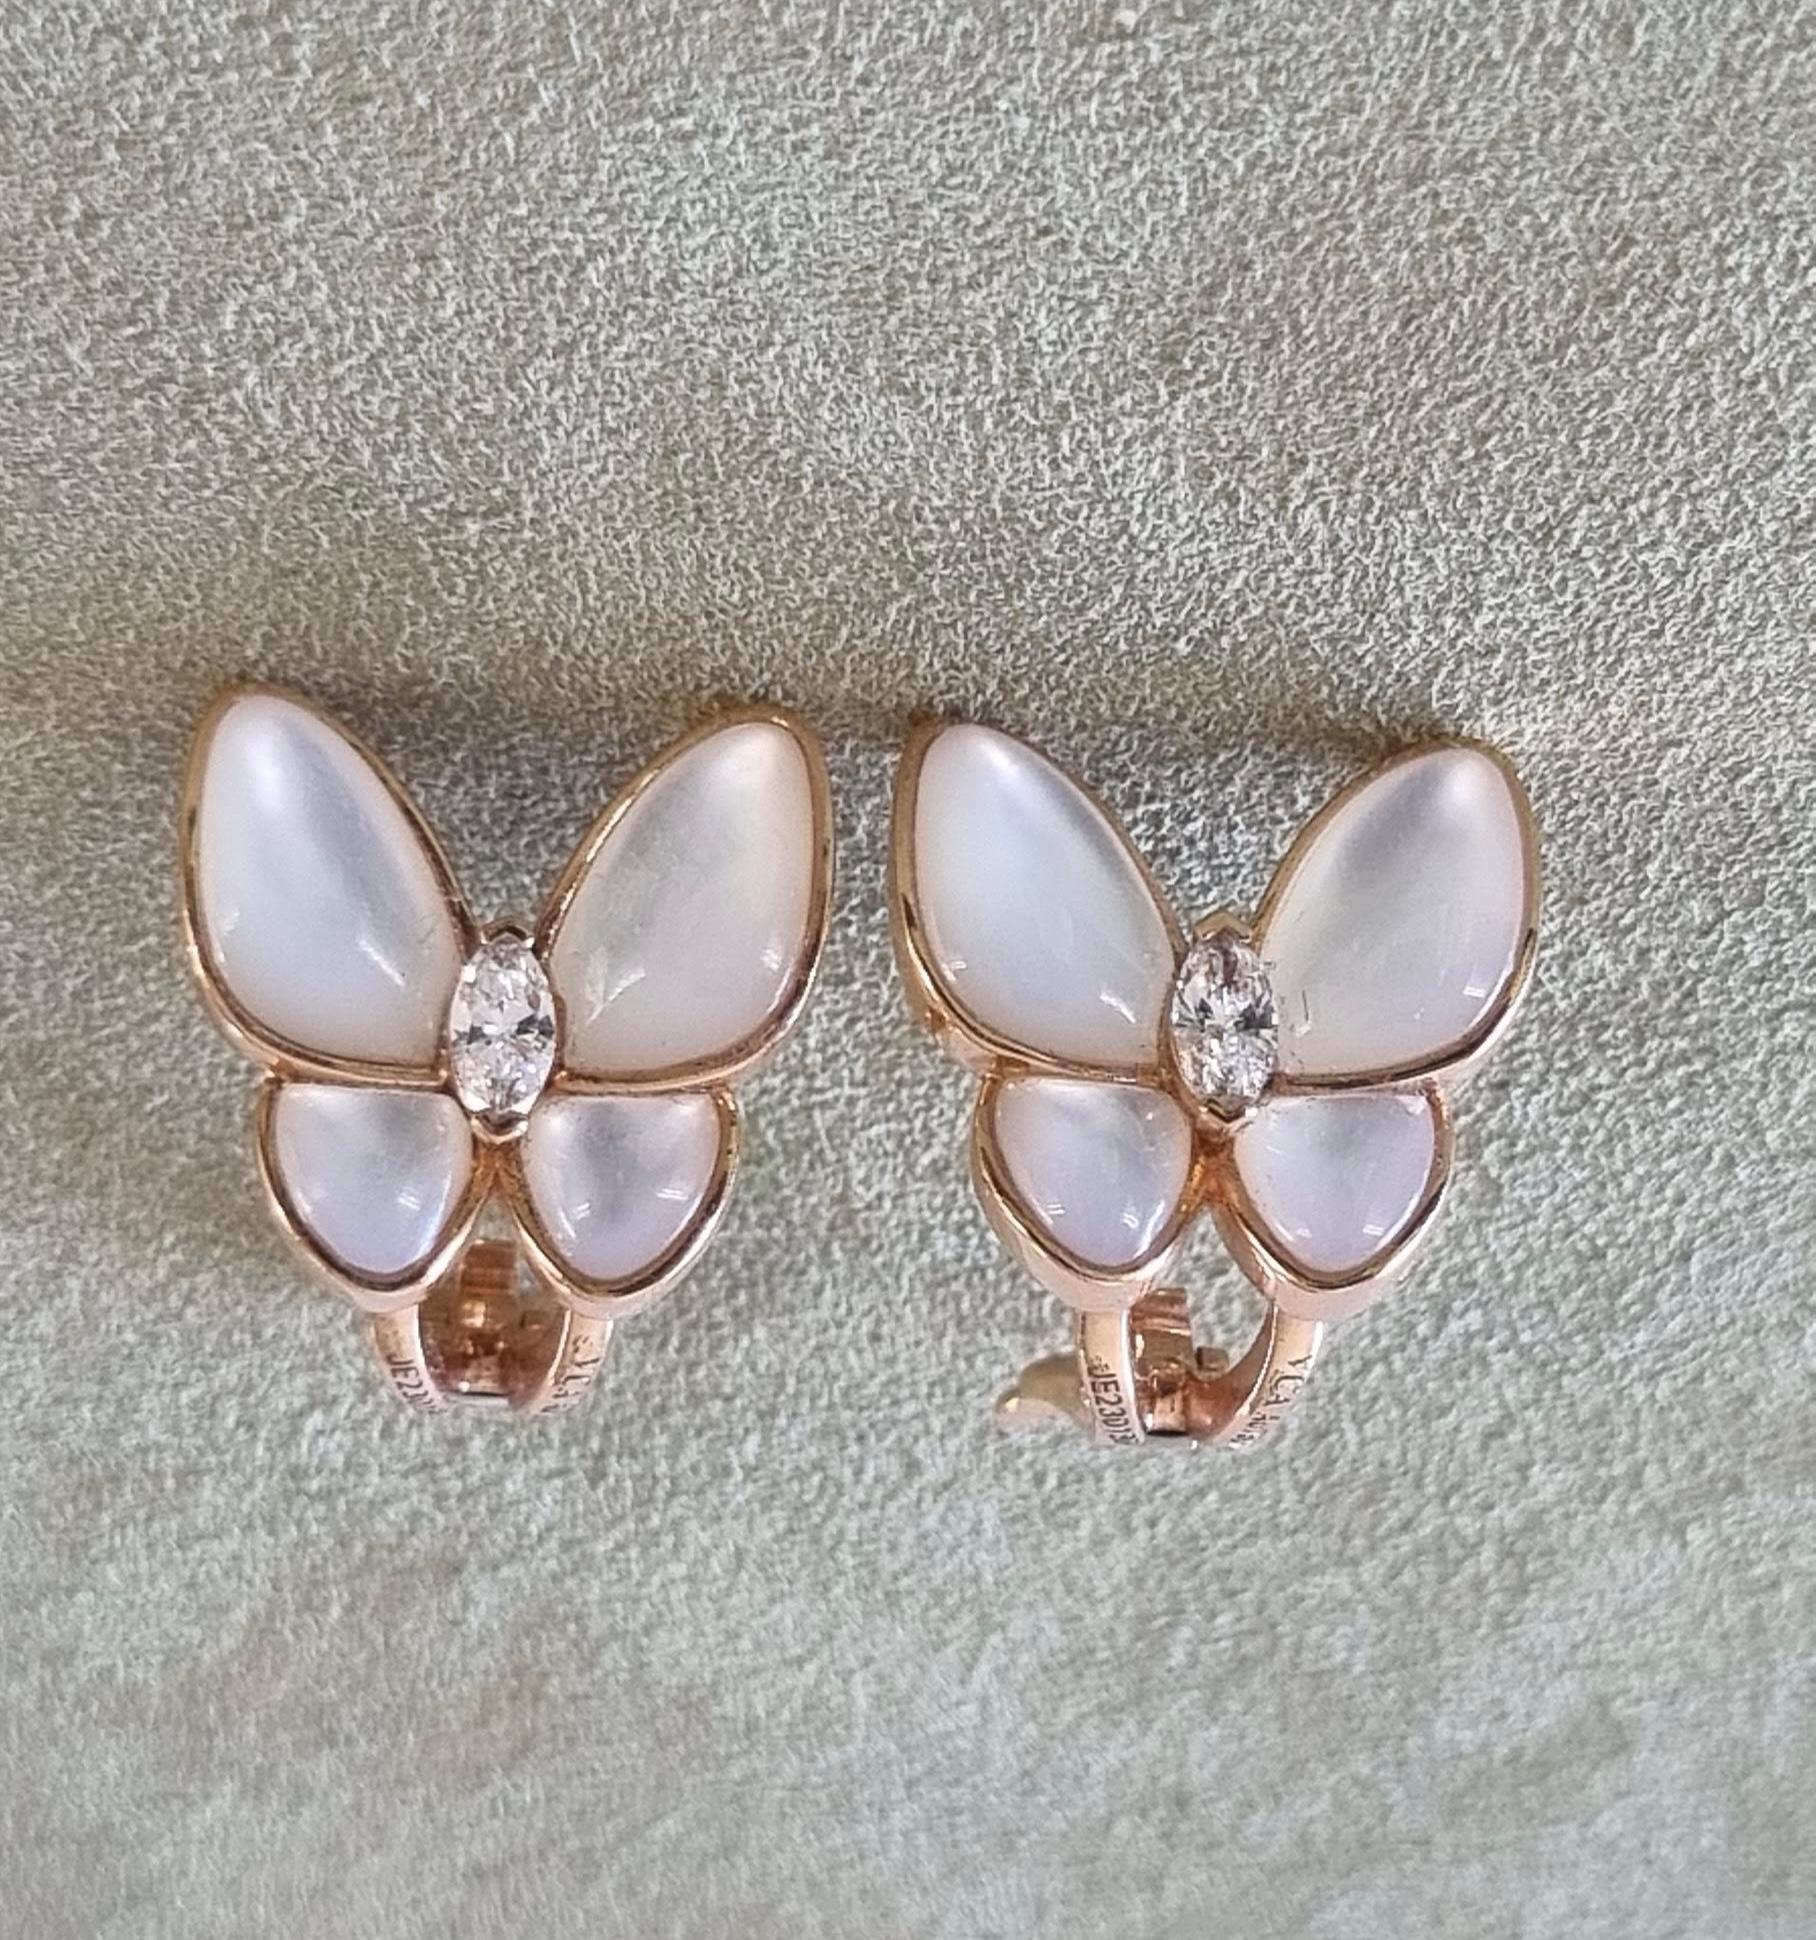 Two Butterfly earrings, 18K rose gold, white mother-of-pearl, rhodium plated 18K white gold, marquise-cut diamonds, diamond quality DEF, IF to VVS.
REF.VCARO8FN00
Diamond: 2 stones, 0.31 carat
Mother-of-pearl: 8 stones
Clip back with detachable stem